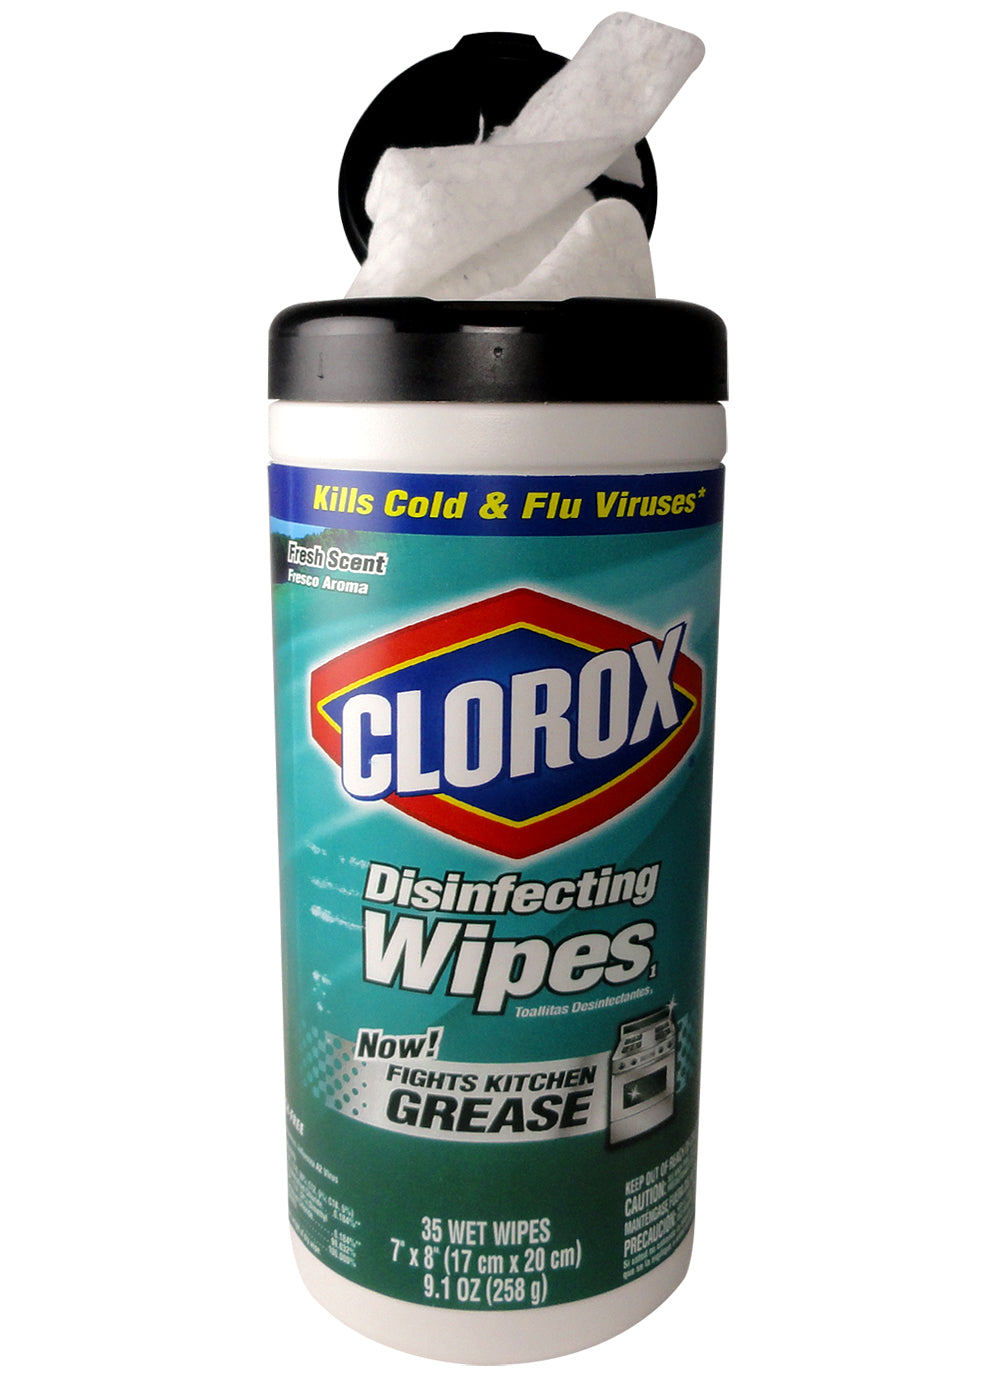 Clorox Disinfecting Wipe Diversion Safe (Wipes Included)